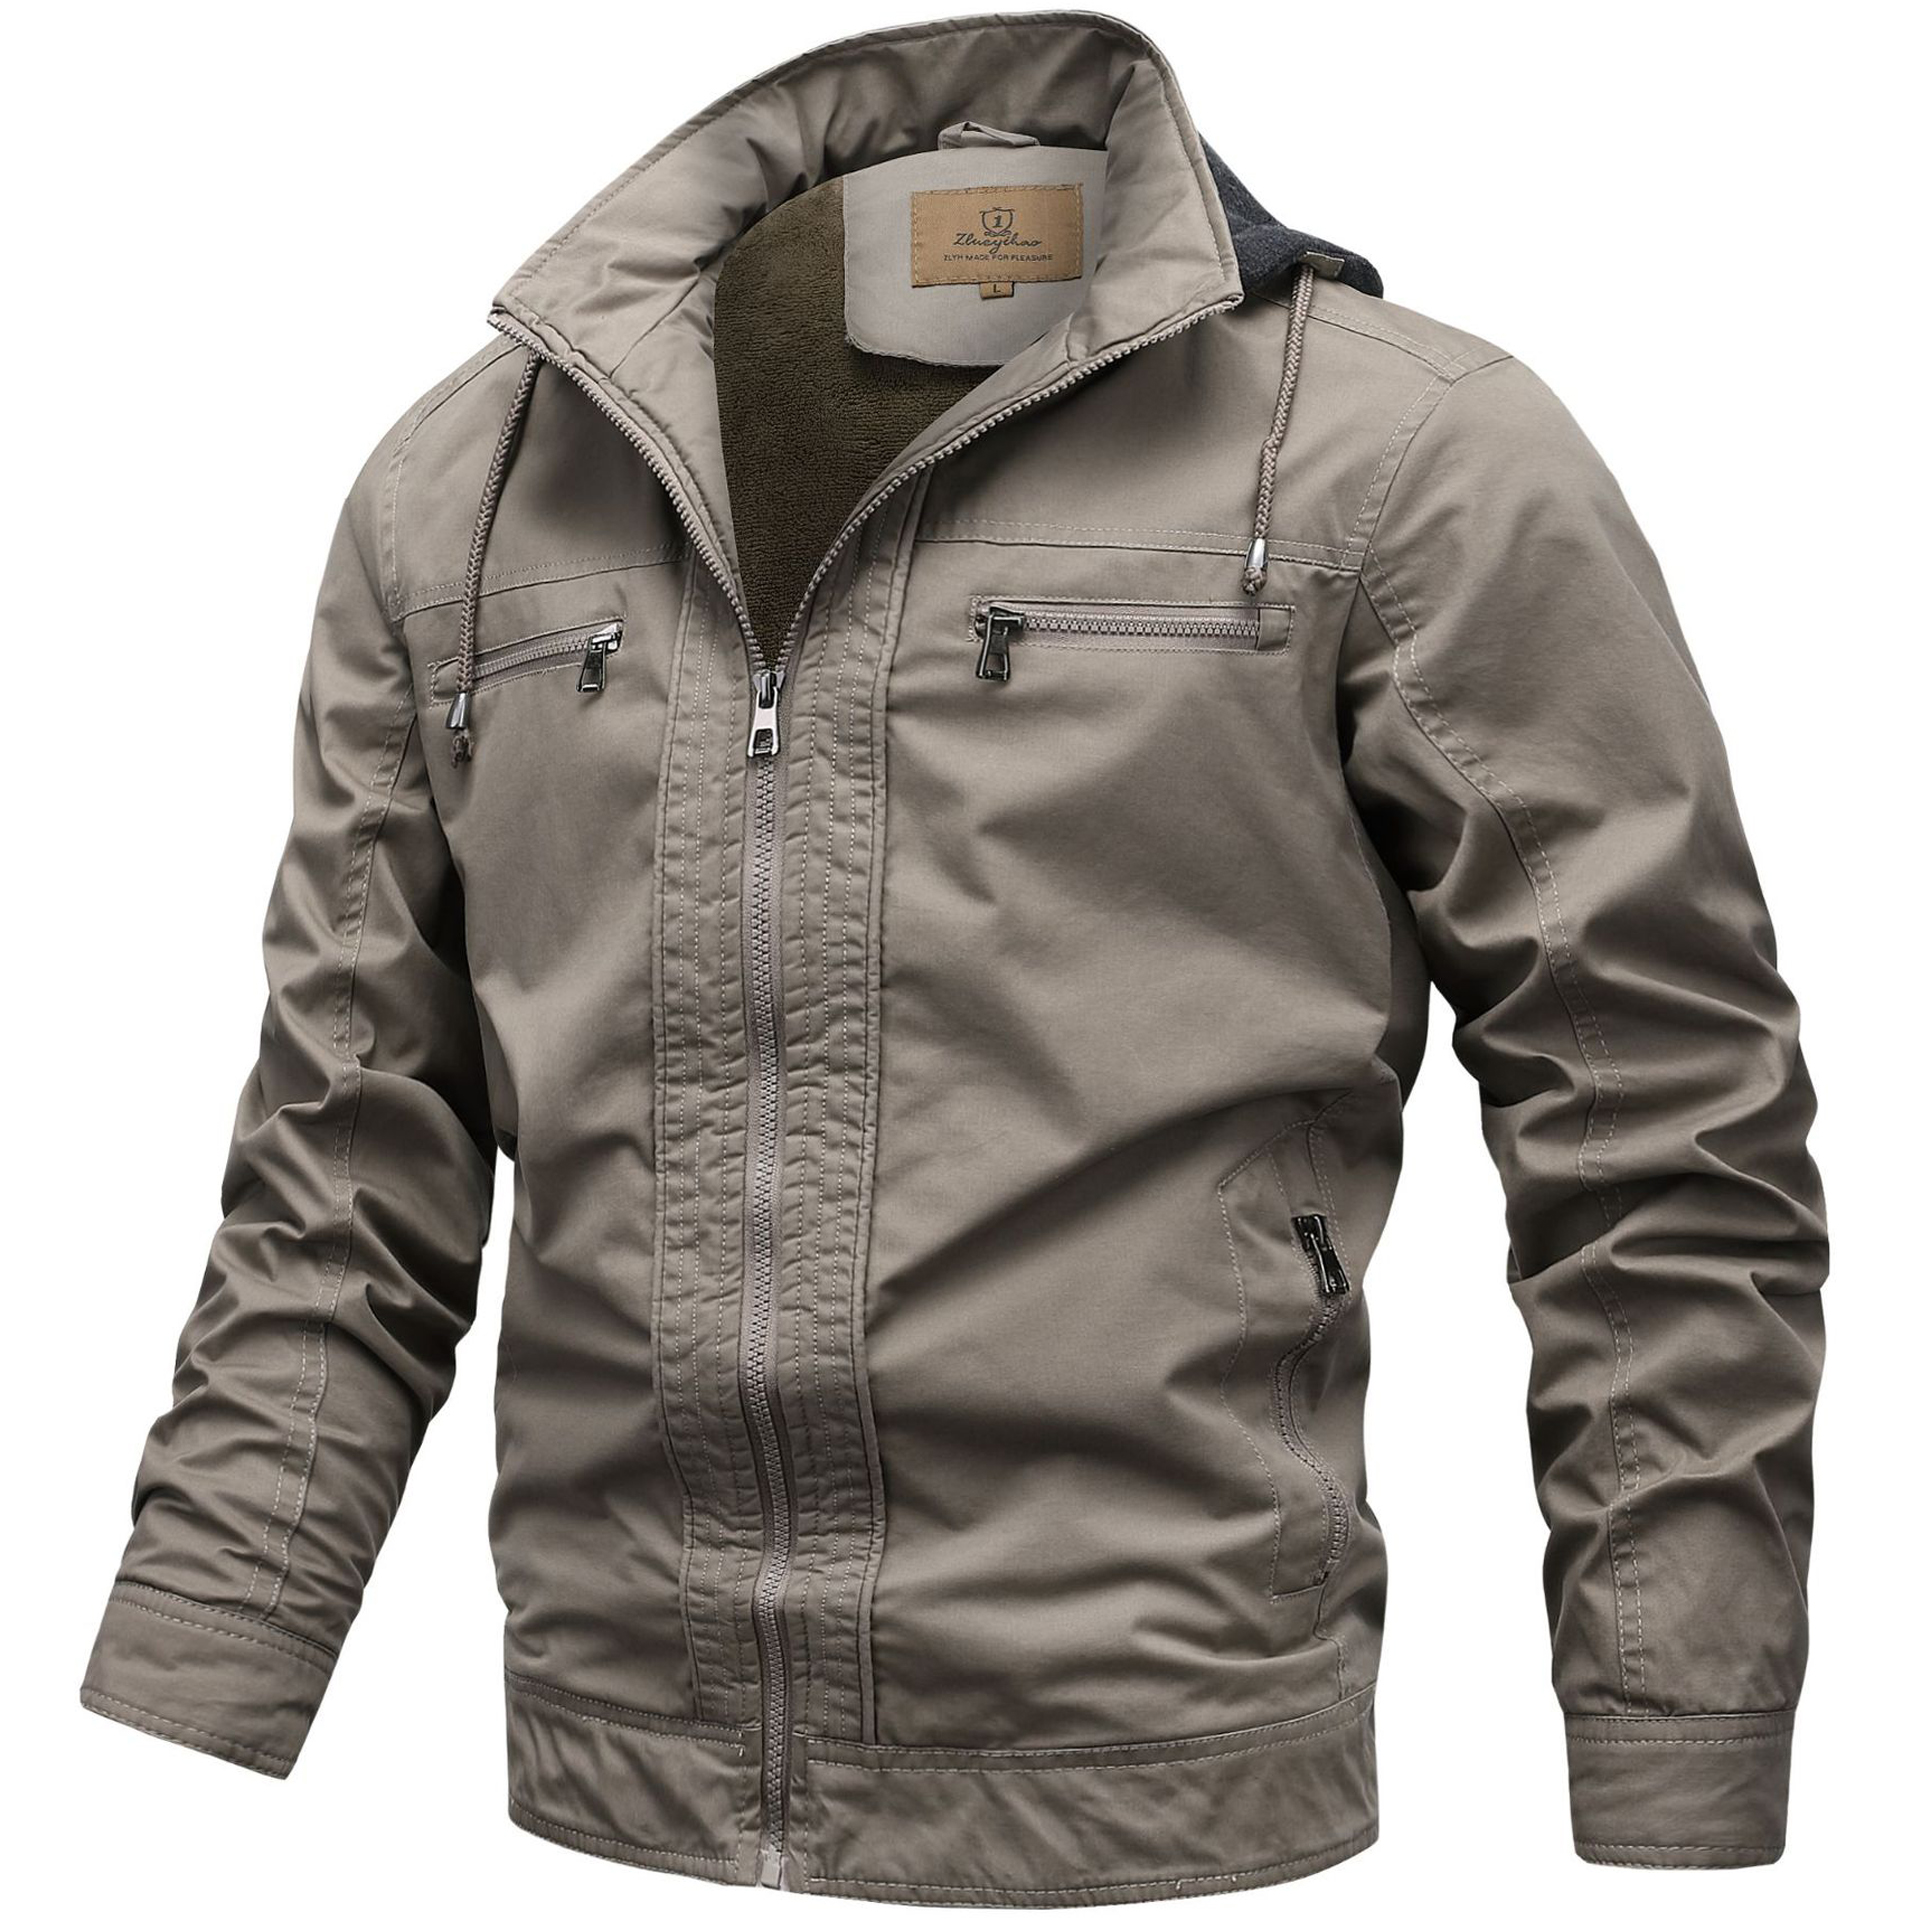 Men's Outdoor Thermal Cashmere Chic Washed Cotton Jacket